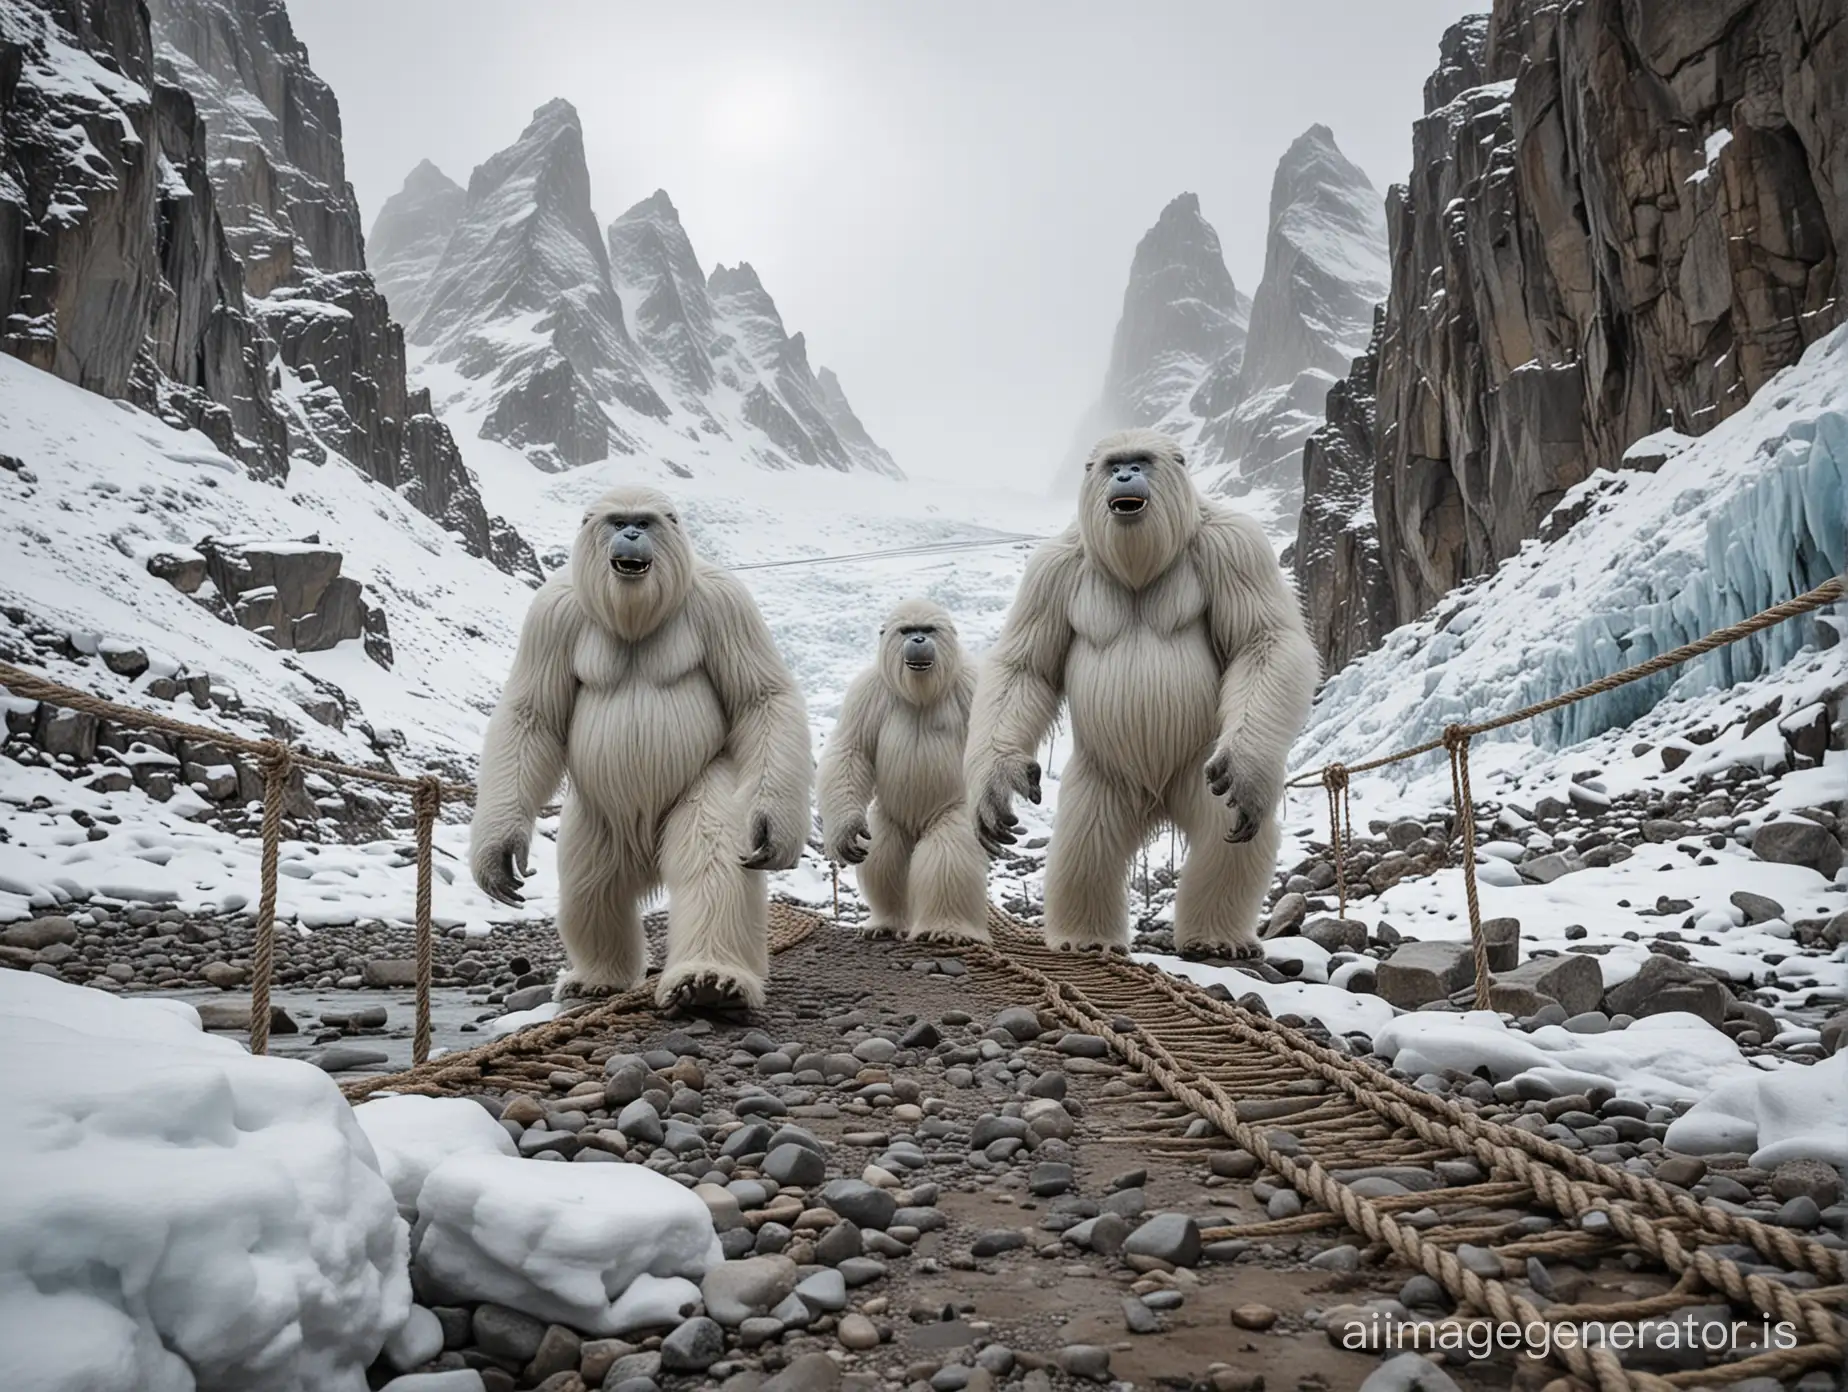 three large all Yeti hairy and white throwing rocks. snowy glacier mountain pass. rope bridges across deep crevasses in the background